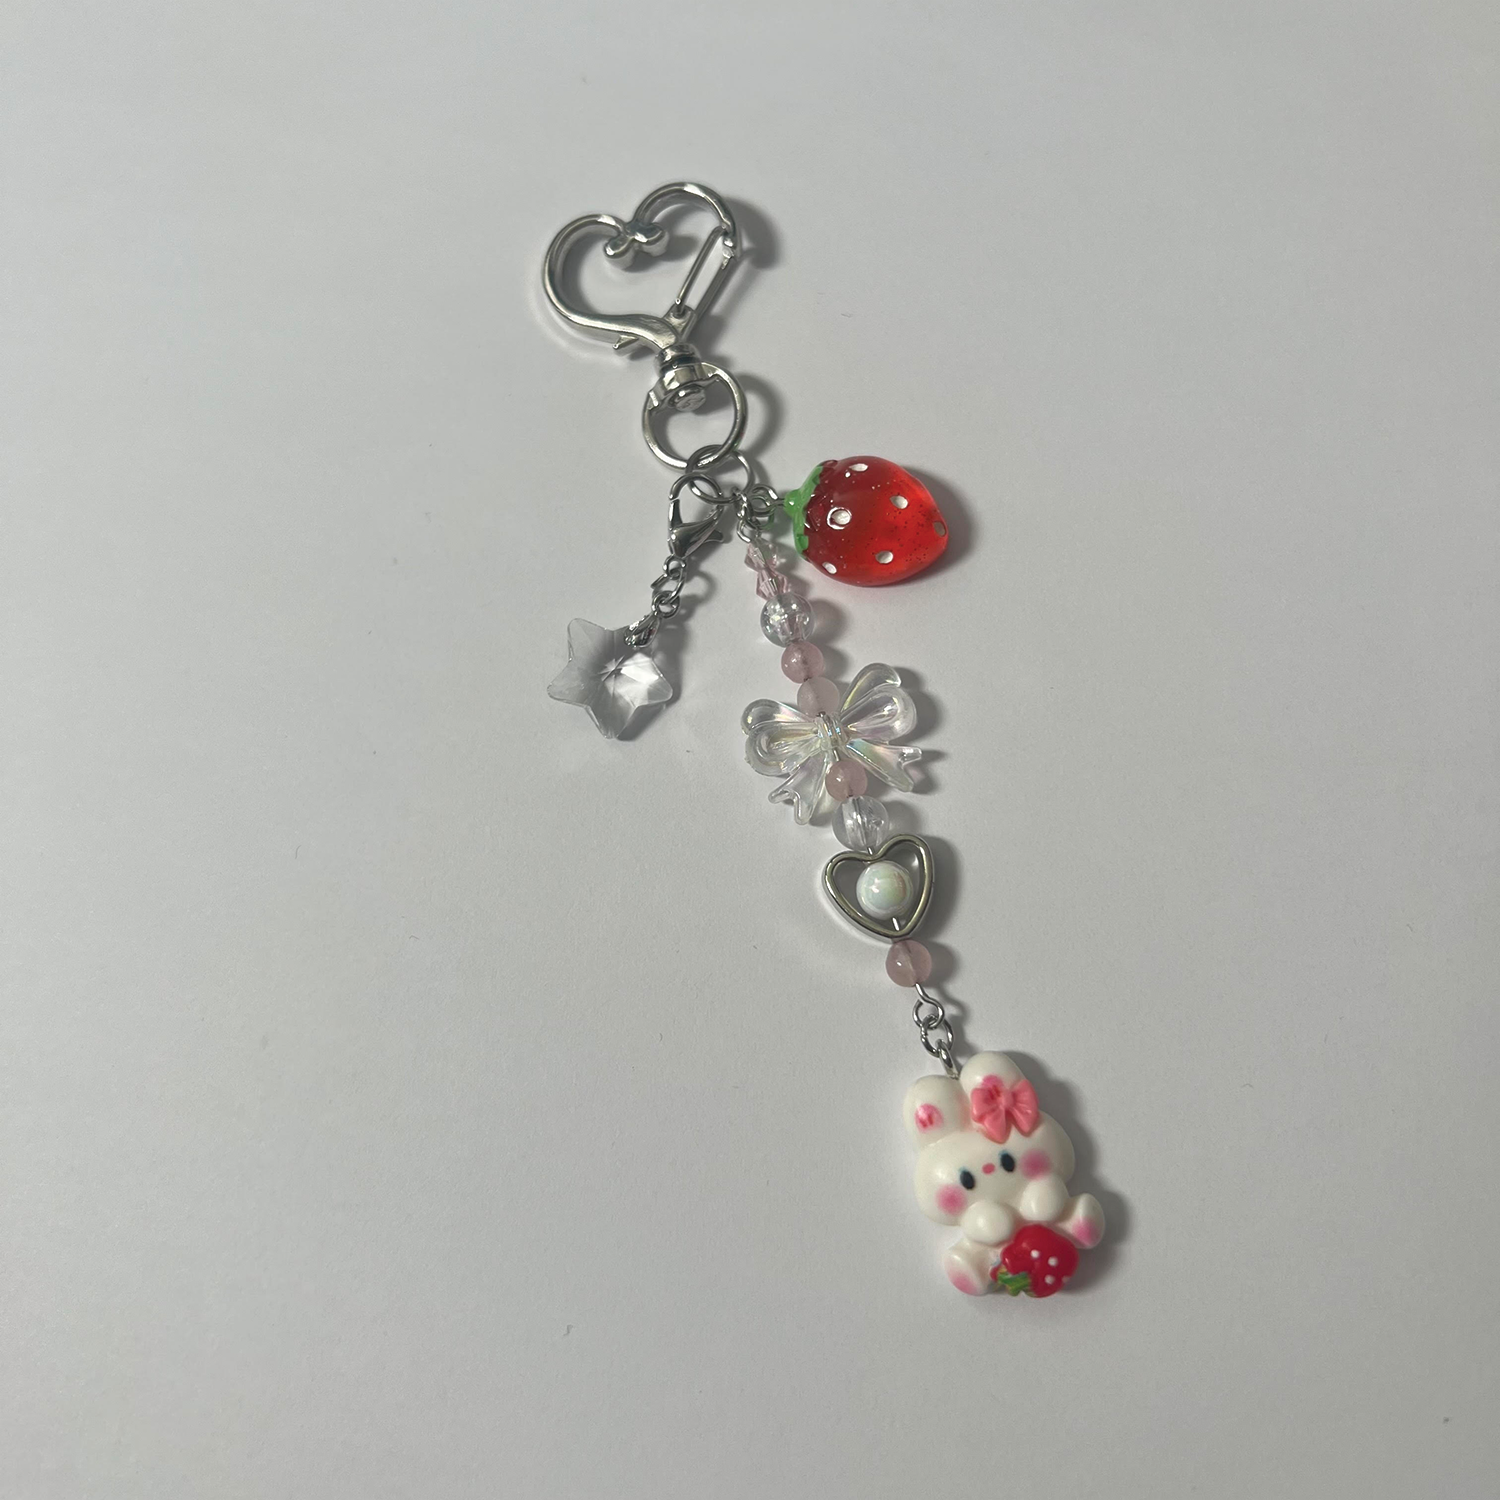 SPECIALTY CHARMS/KEYCHAINS